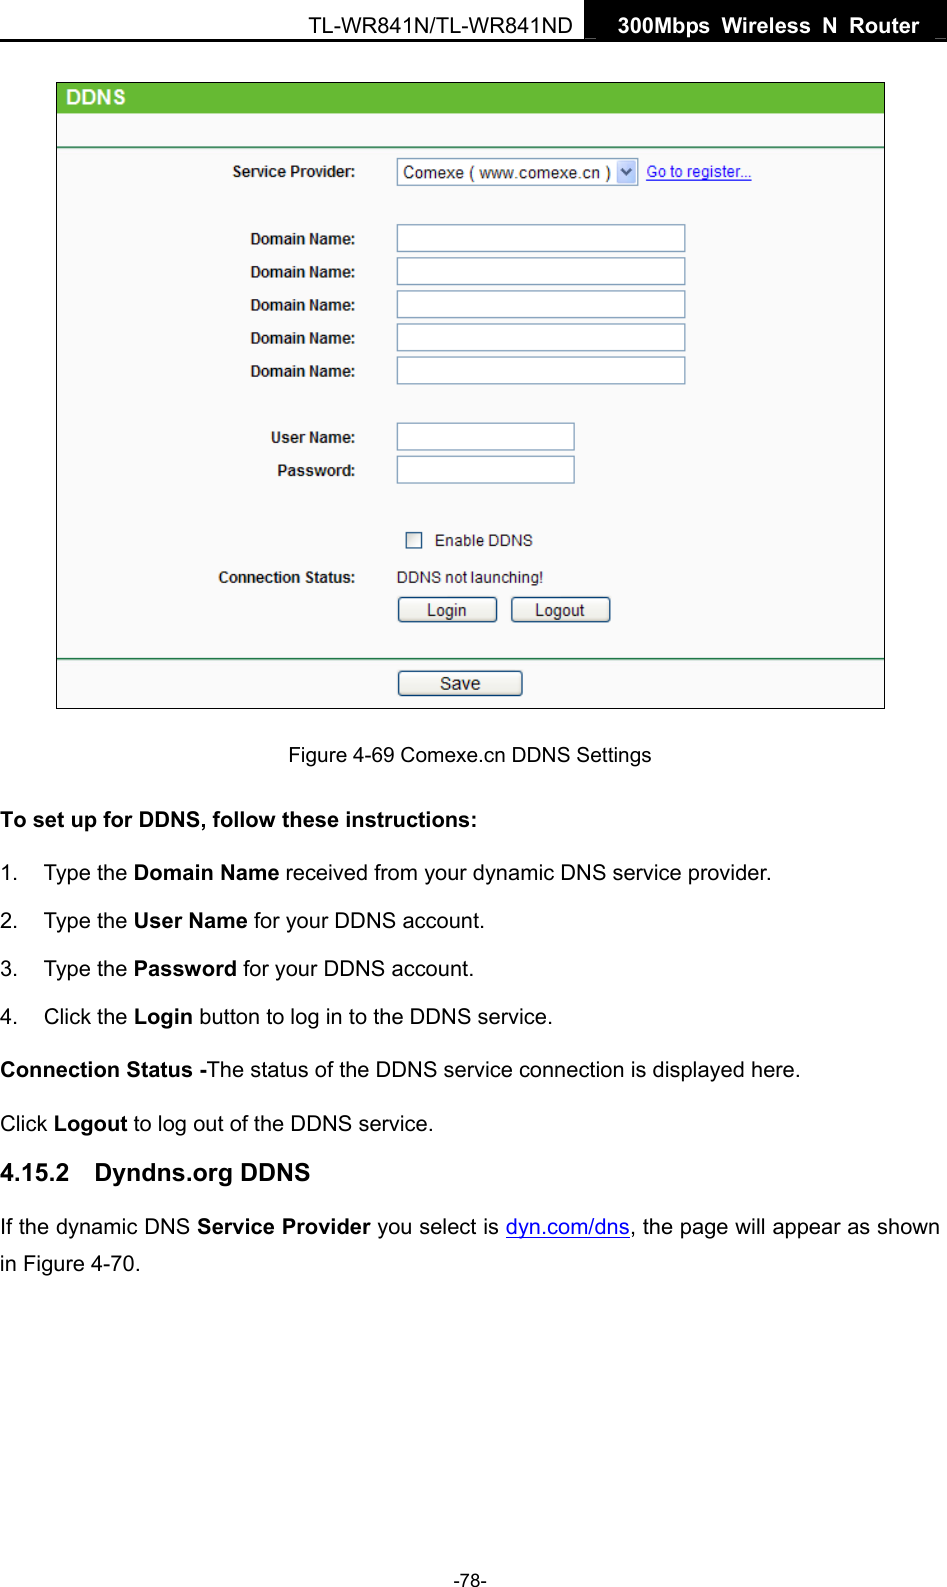   300Mbps Wireless N Router TL-WR841N/TL-WR841ND -78-  Figure 4-69 Comexe.cn DDNS Settings To set up for DDNS, follow these instructions: 1. Type the Domain Name received from your dynamic DNS service provider.     2. Type the User Name for your DDNS account.   3. Type the Password for your DDNS account.   4. Click the Login button to log in to the DDNS service. Connection Status -The status of the DDNS service connection is displayed here. Click Logout to log out of the DDNS service.   4.15.2  Dyndns.org DDNS If the dynamic DNS Service Provider you select is dyn.com/dns, the page will appear as shown in Figure 4-70. 